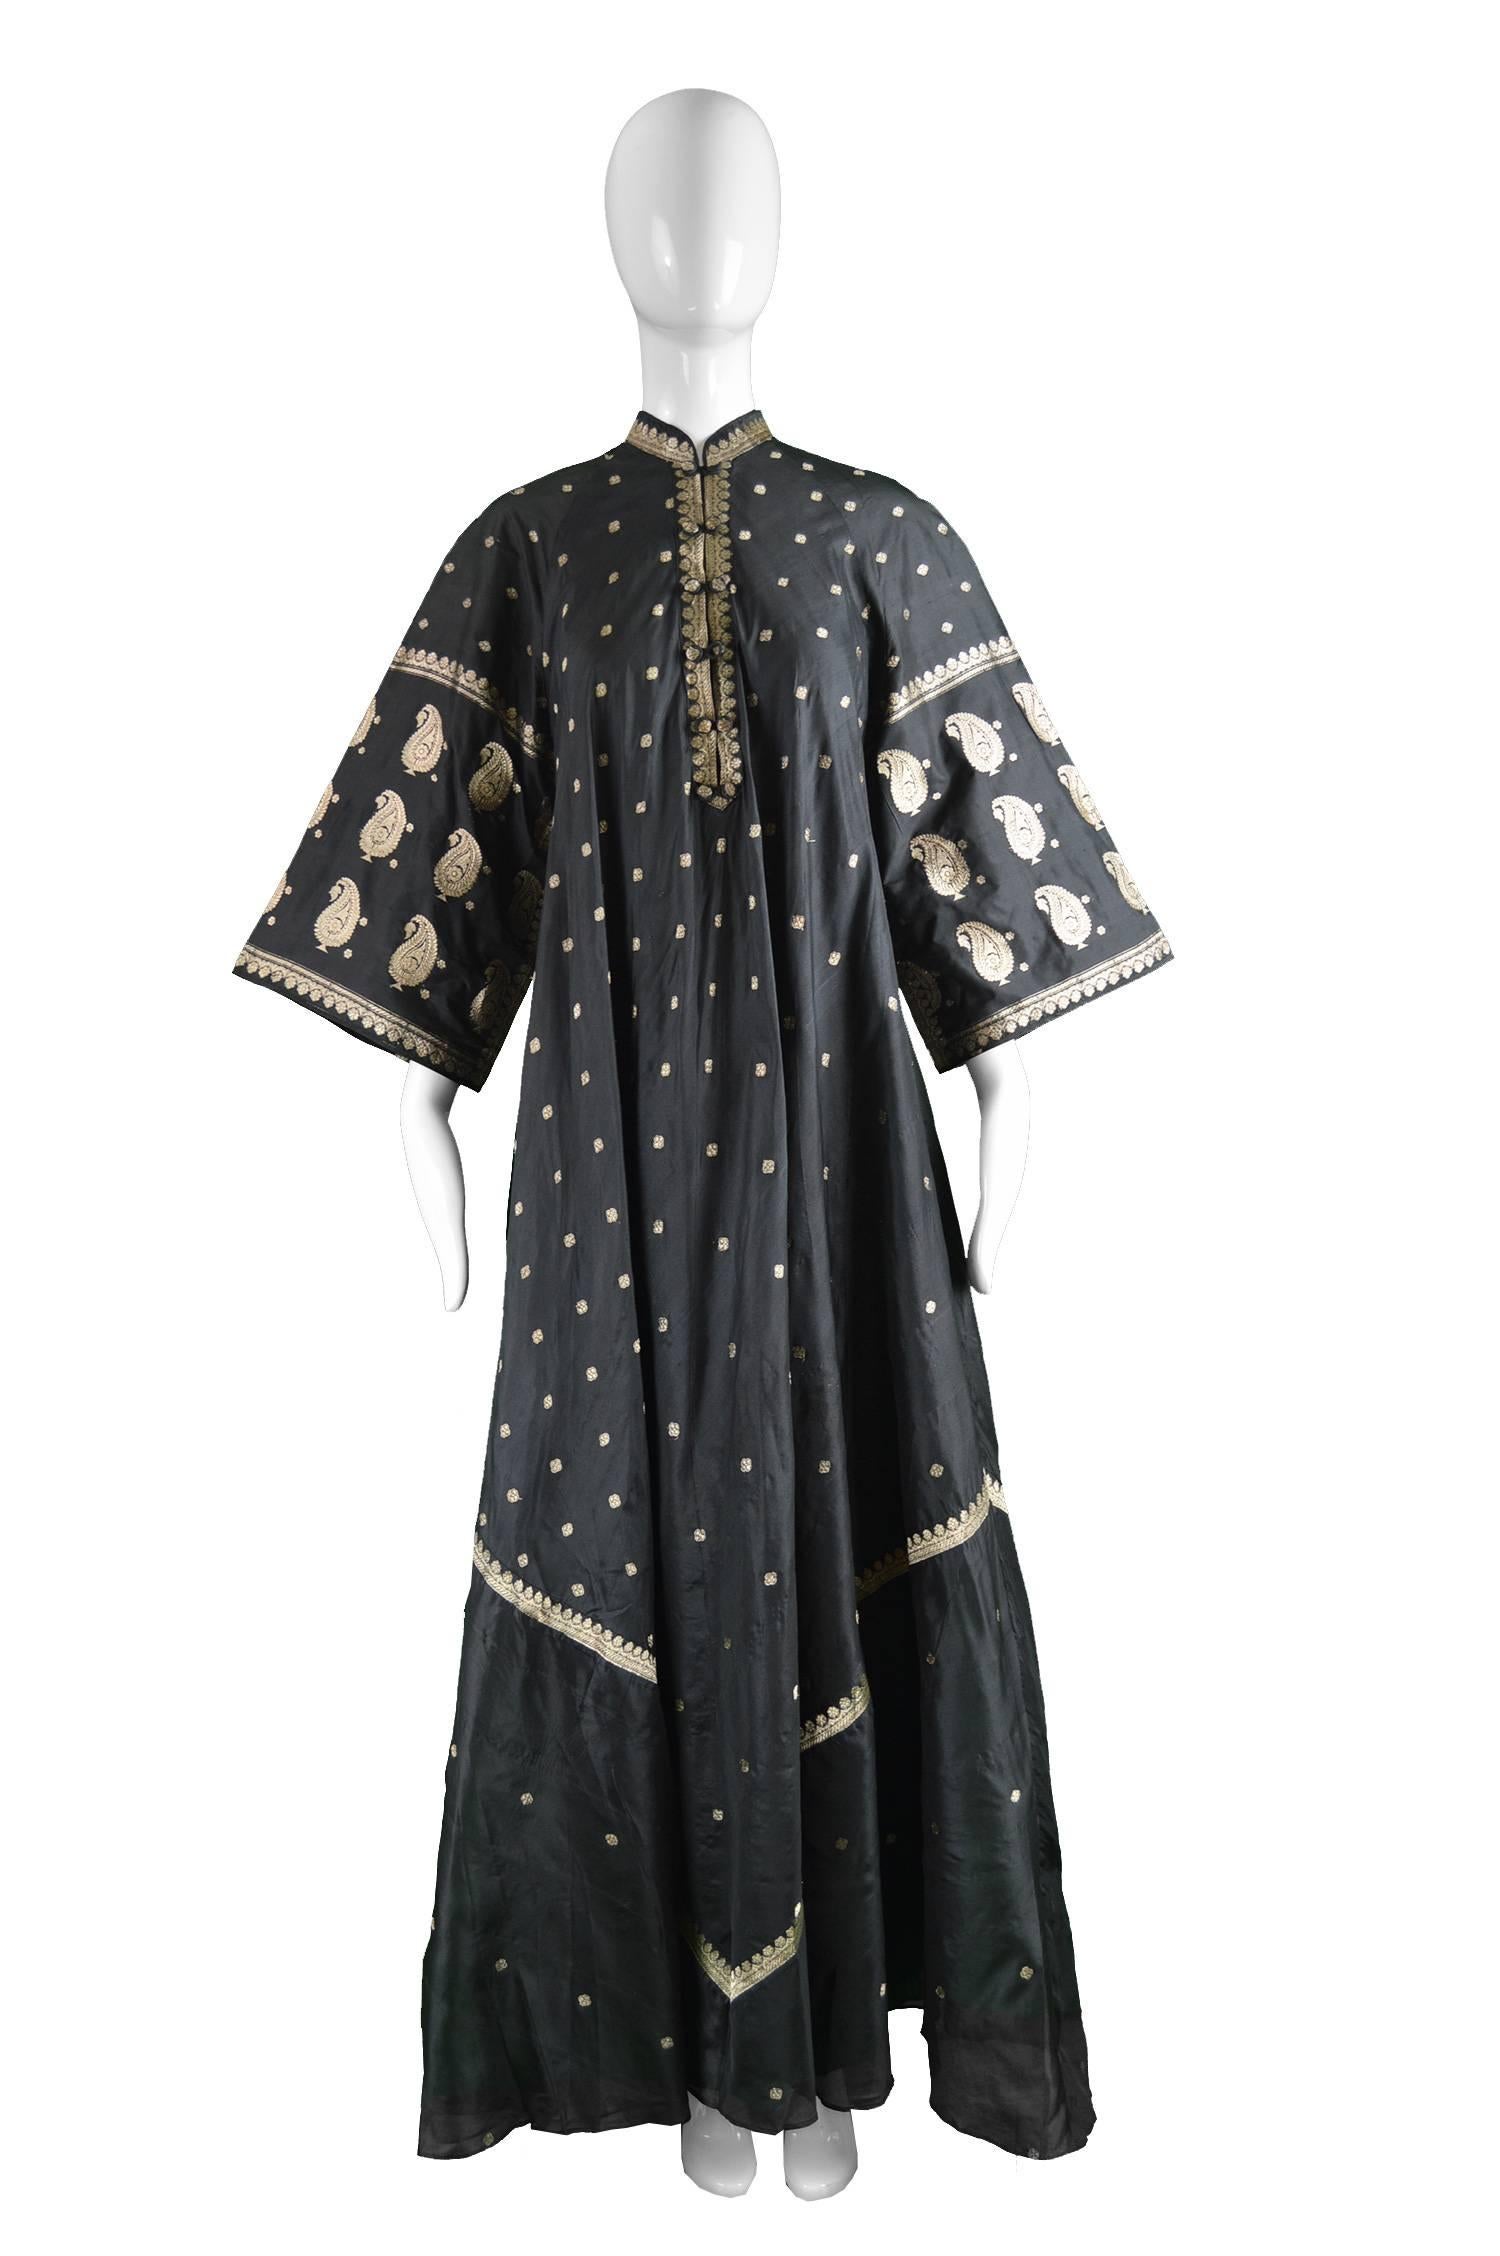 Indian Silk Black & Gold Lamé Brocade Vintage Maxi Kaftan Dress, 1970s

Estimated Size: Would suit a Small to Large due to loose, flowing silhouette. 
Bust - up to 42” / 106cm
Waist - Free
Hips - Free
Length (Shoulder to Hem) - 57” /